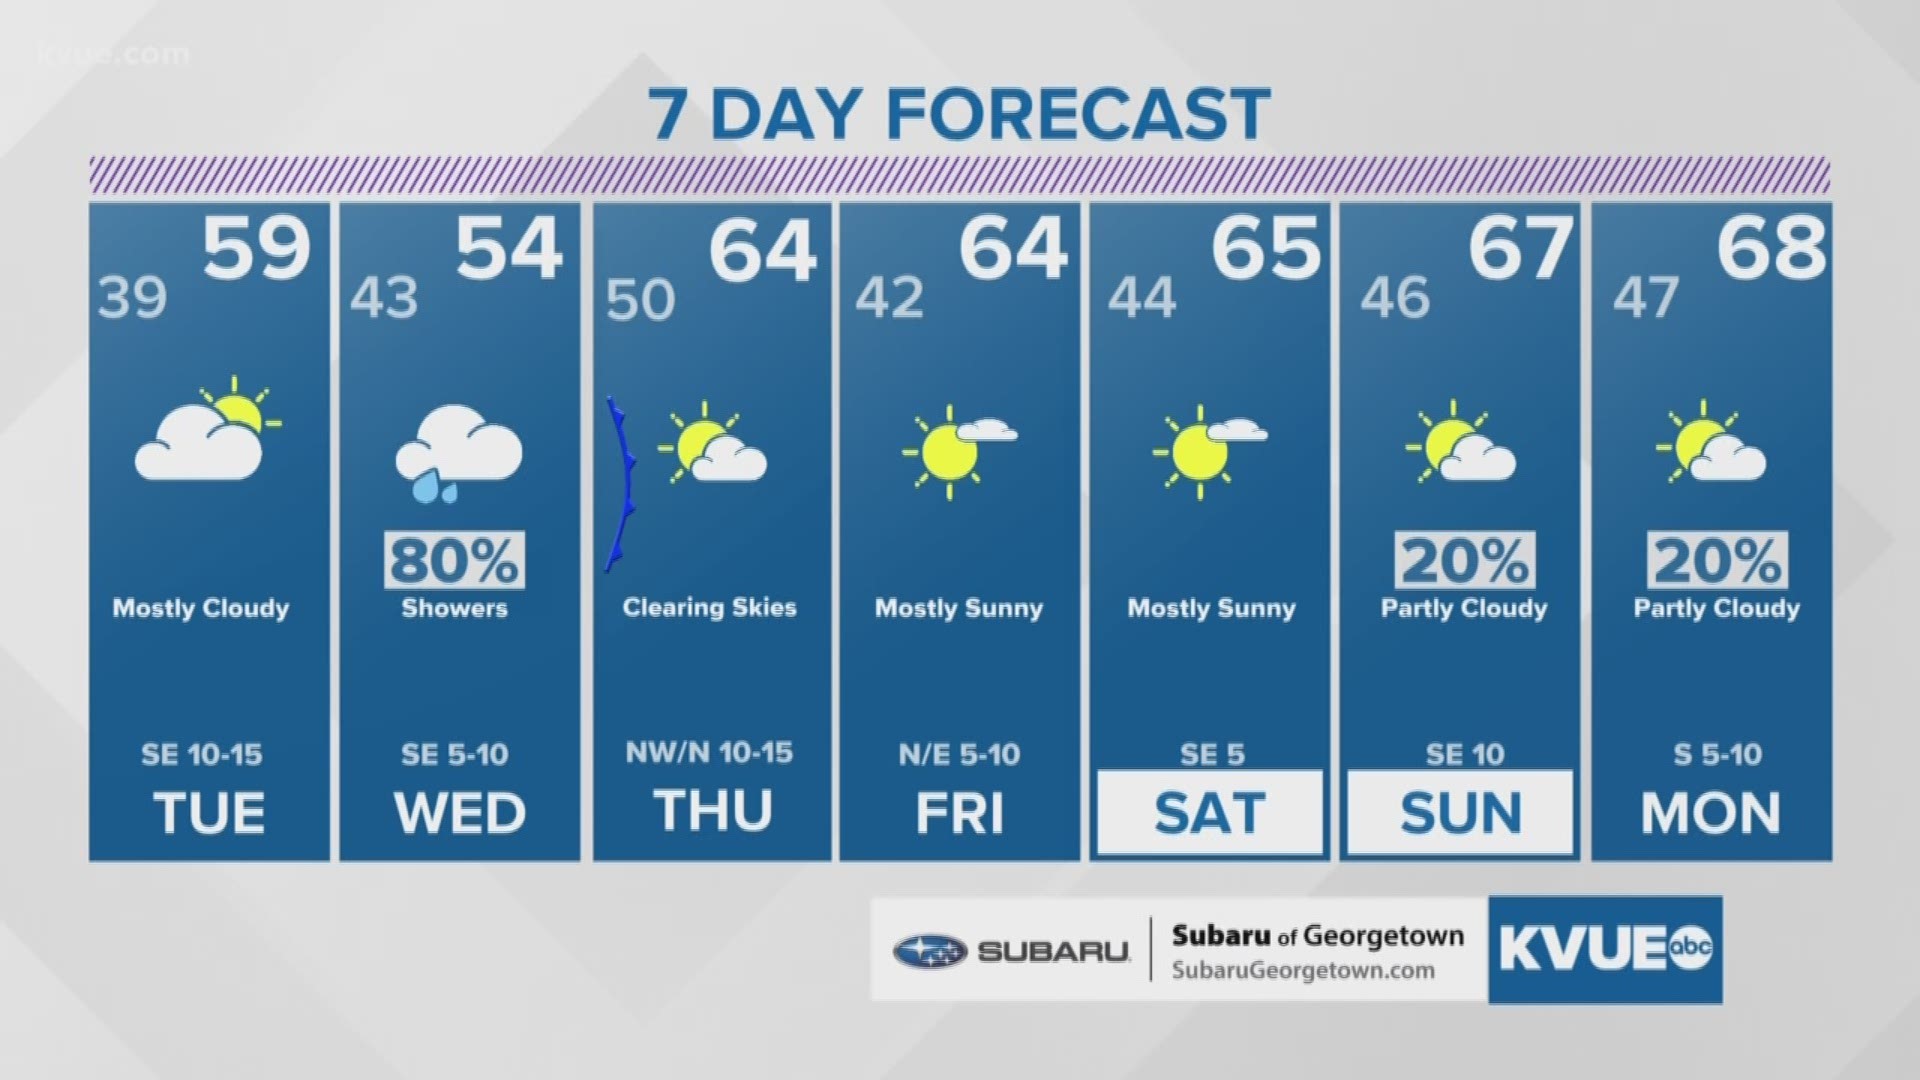 Increasing clouds and cool for Tuesday, Rain chances for Wednesday